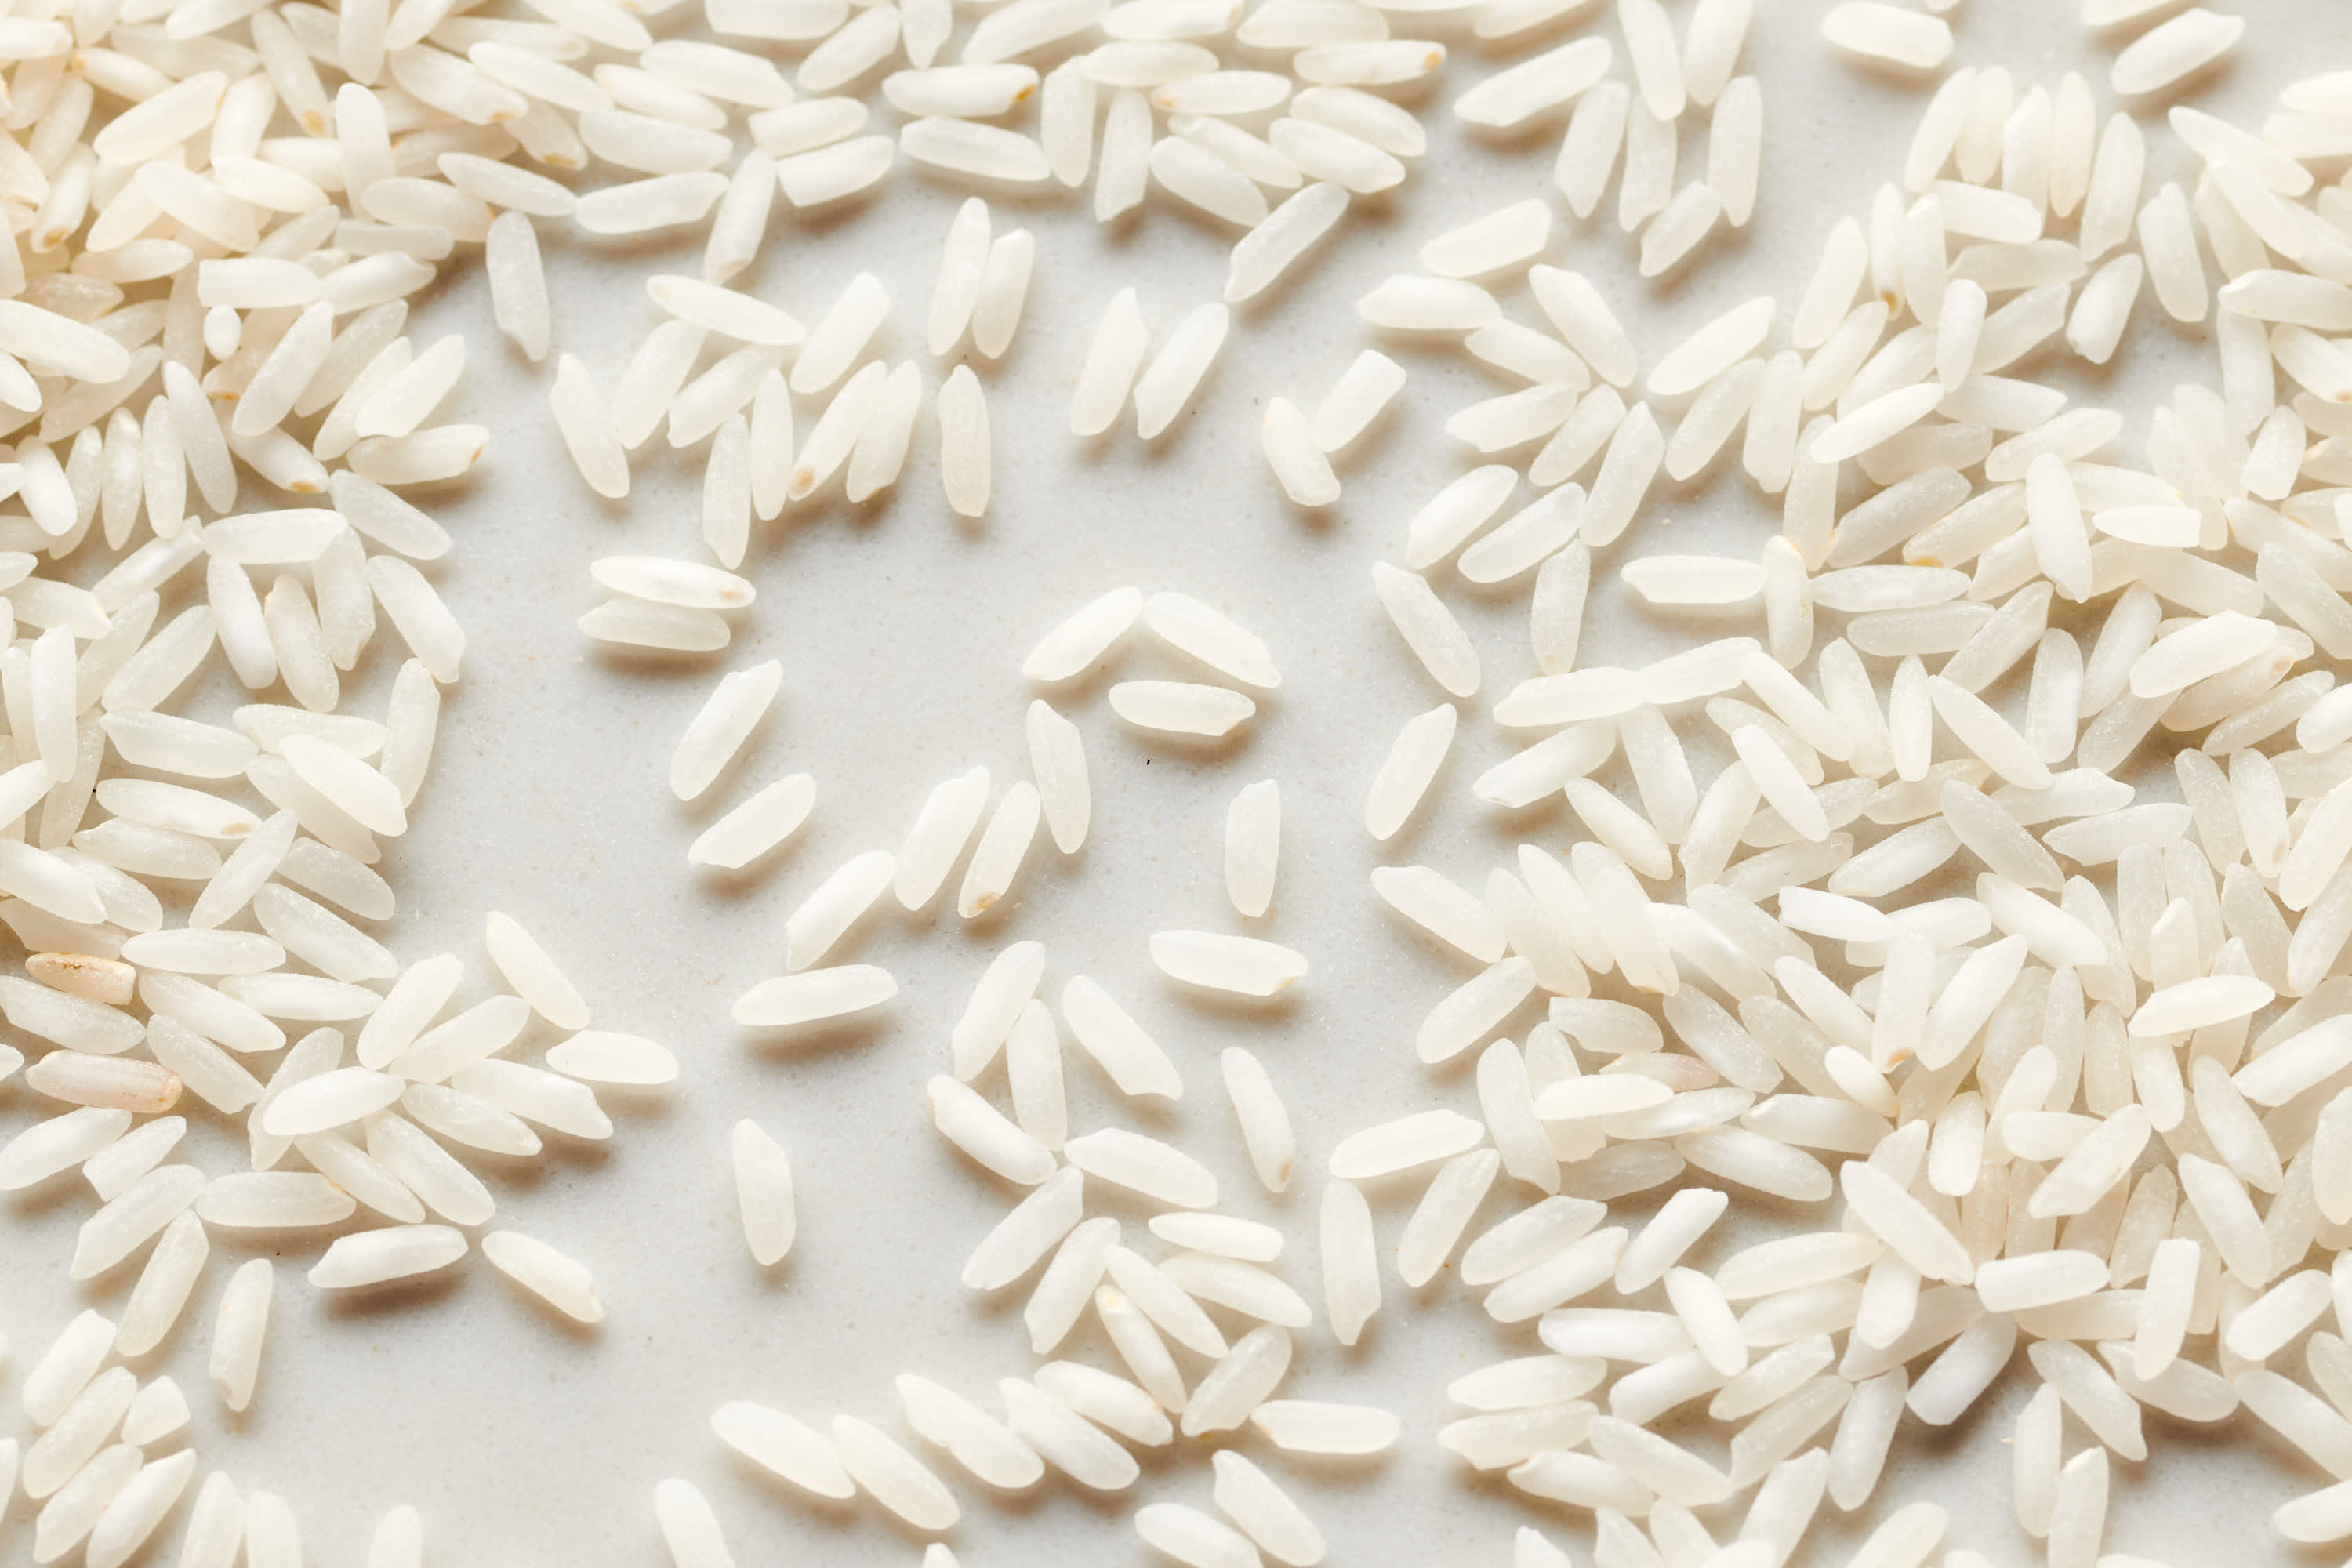 Every Grain Of Rice Offer Cheap, Save 63% | jlcatj.gob.mx